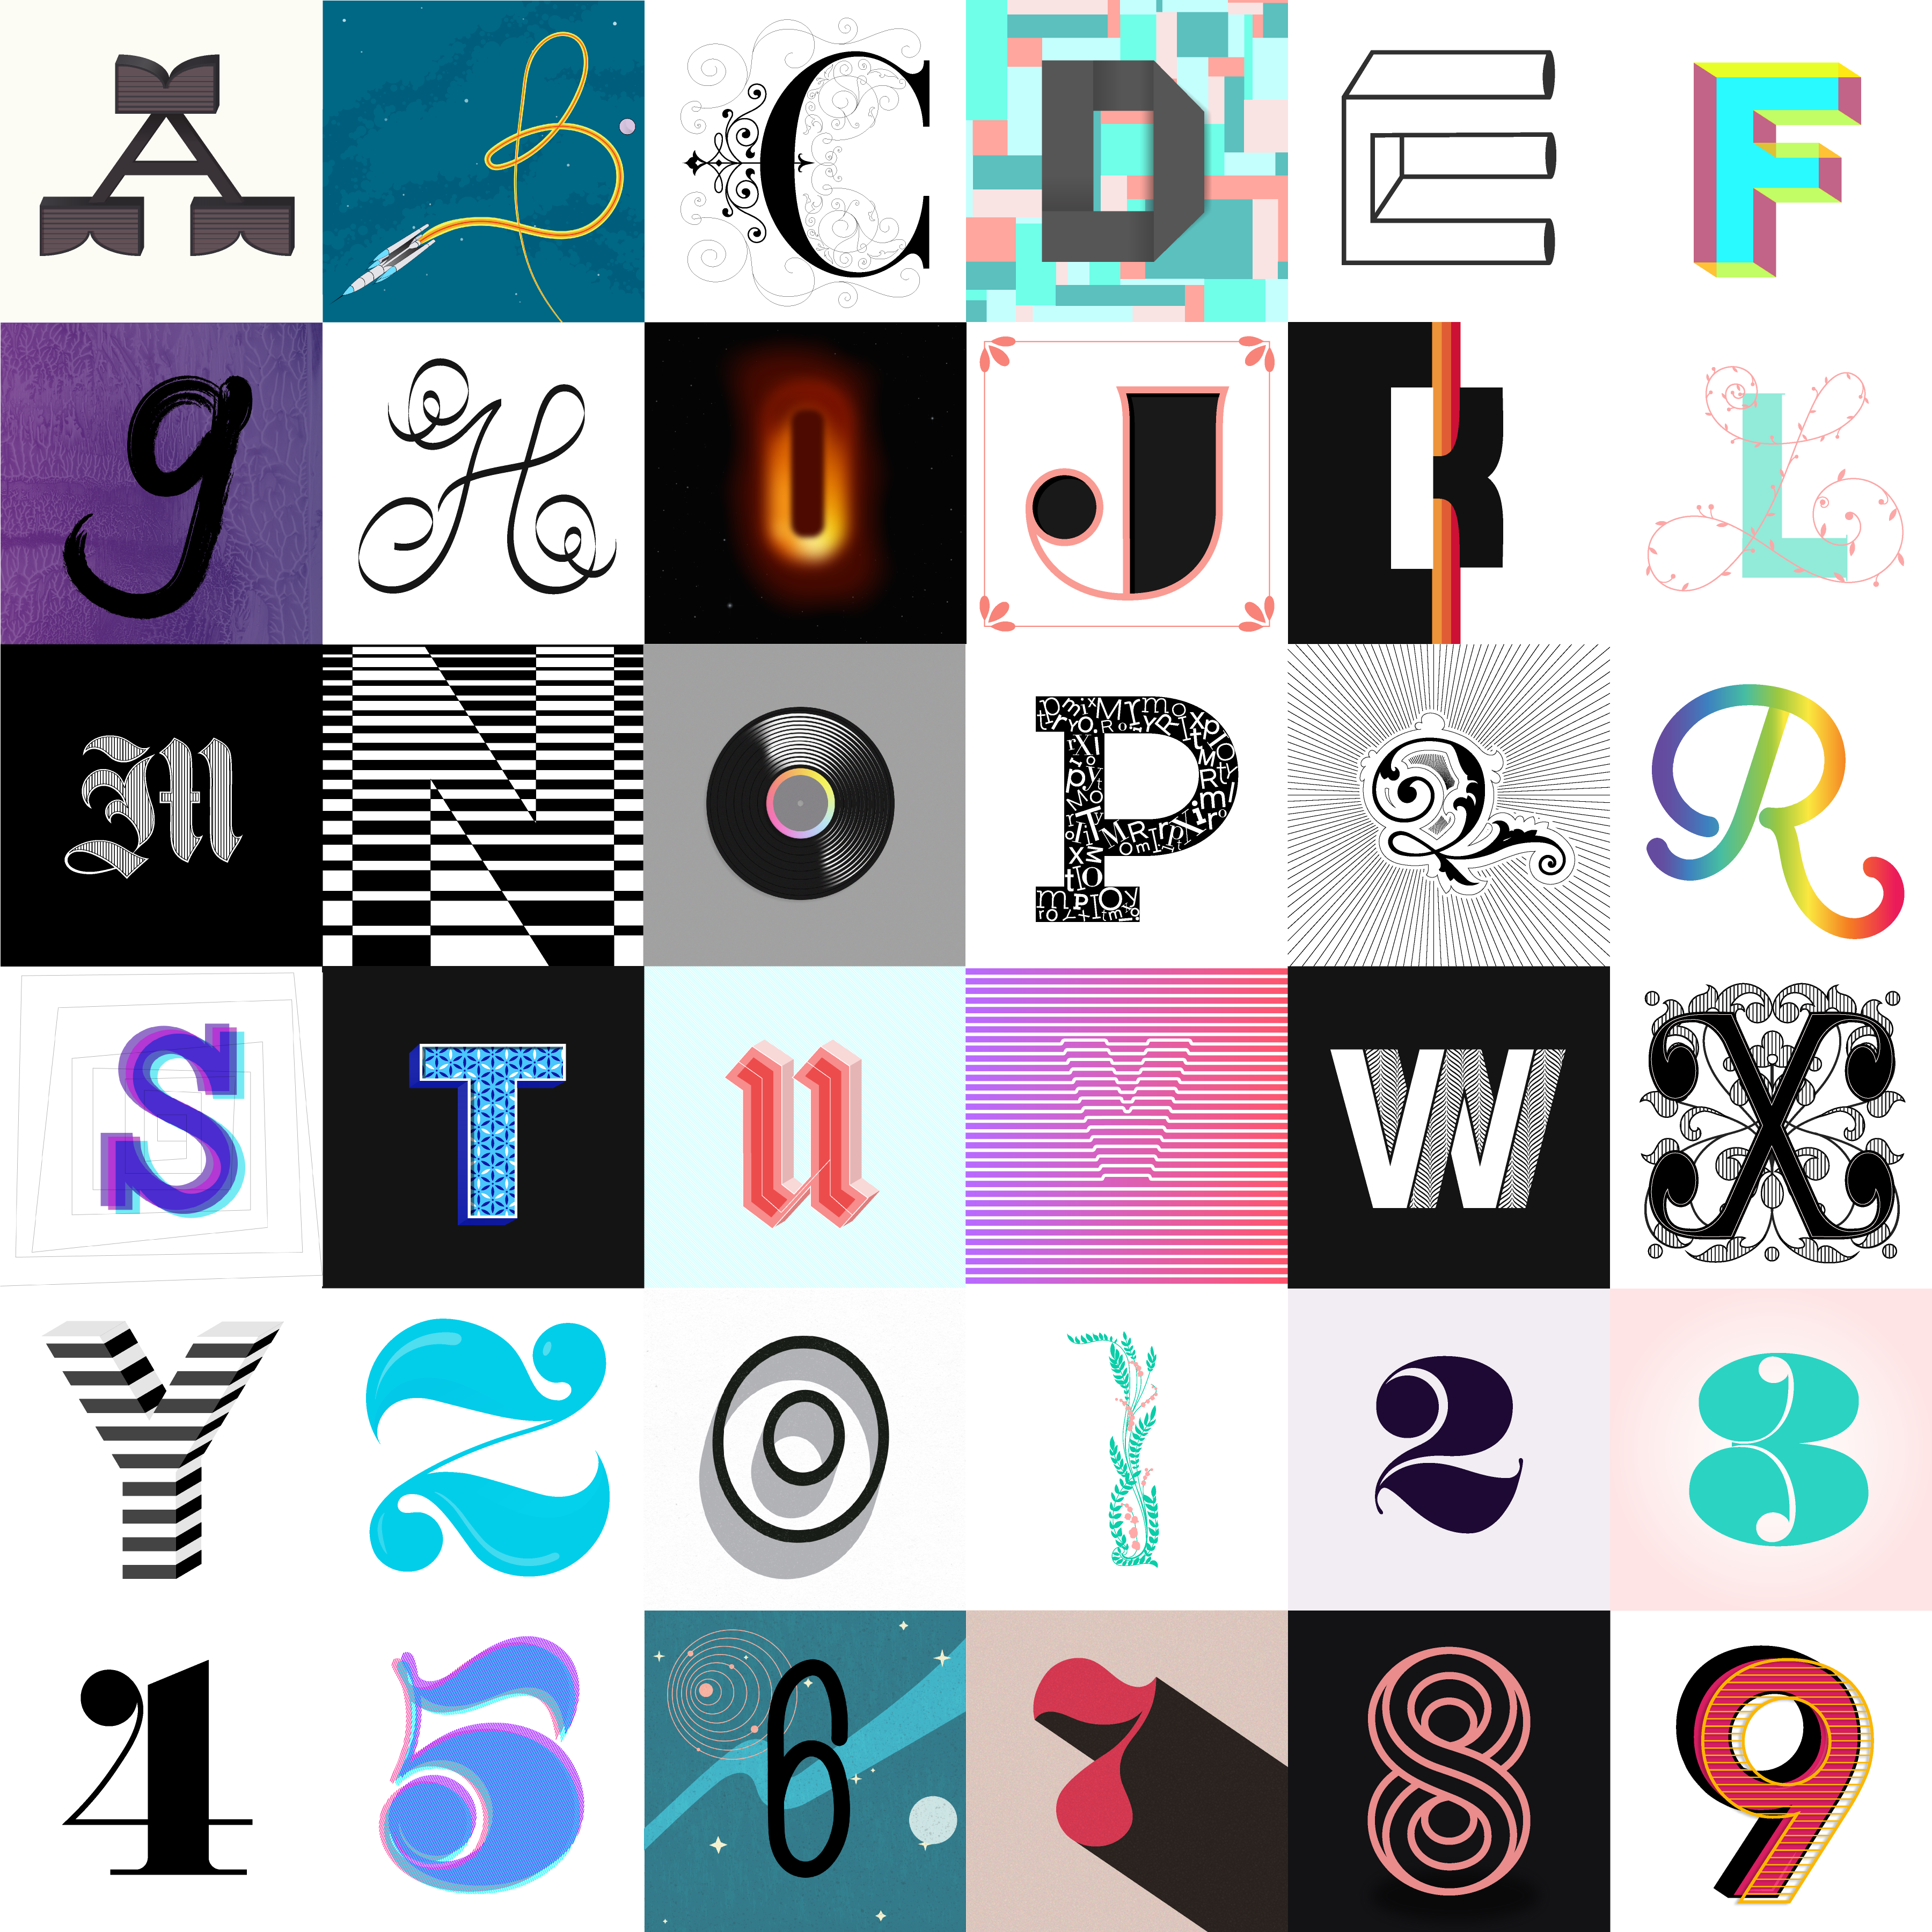 a compilation of the letters and numbers I created for the 36 days of type challenge